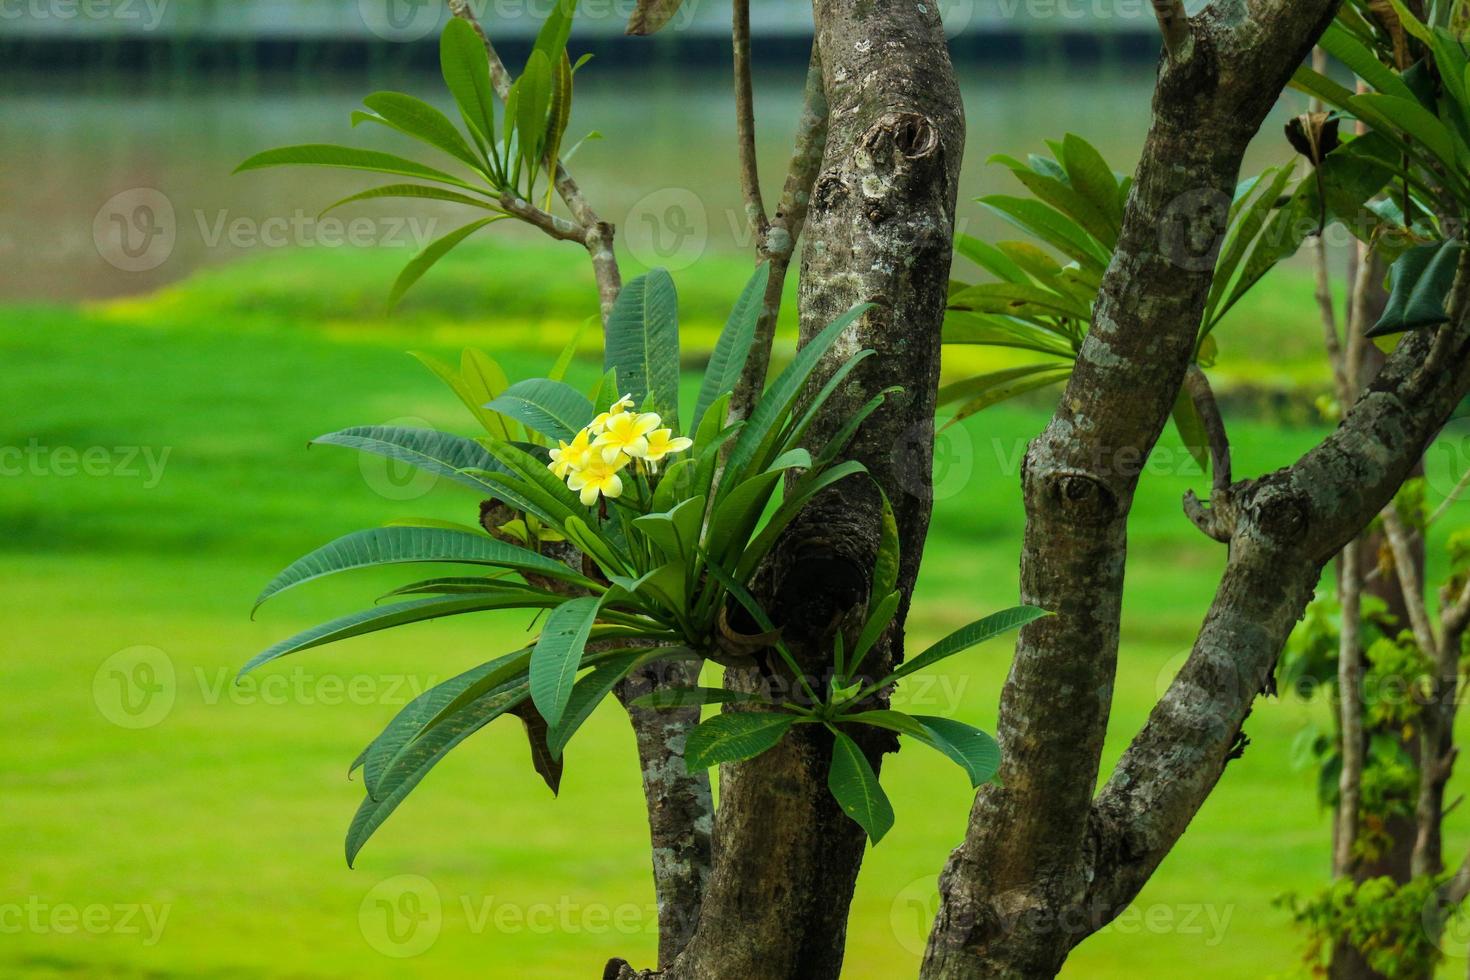 The yellow frangipani tree, Cambodia has the scientific name Plumeria are actually small trees that are native to tropical regions. photo